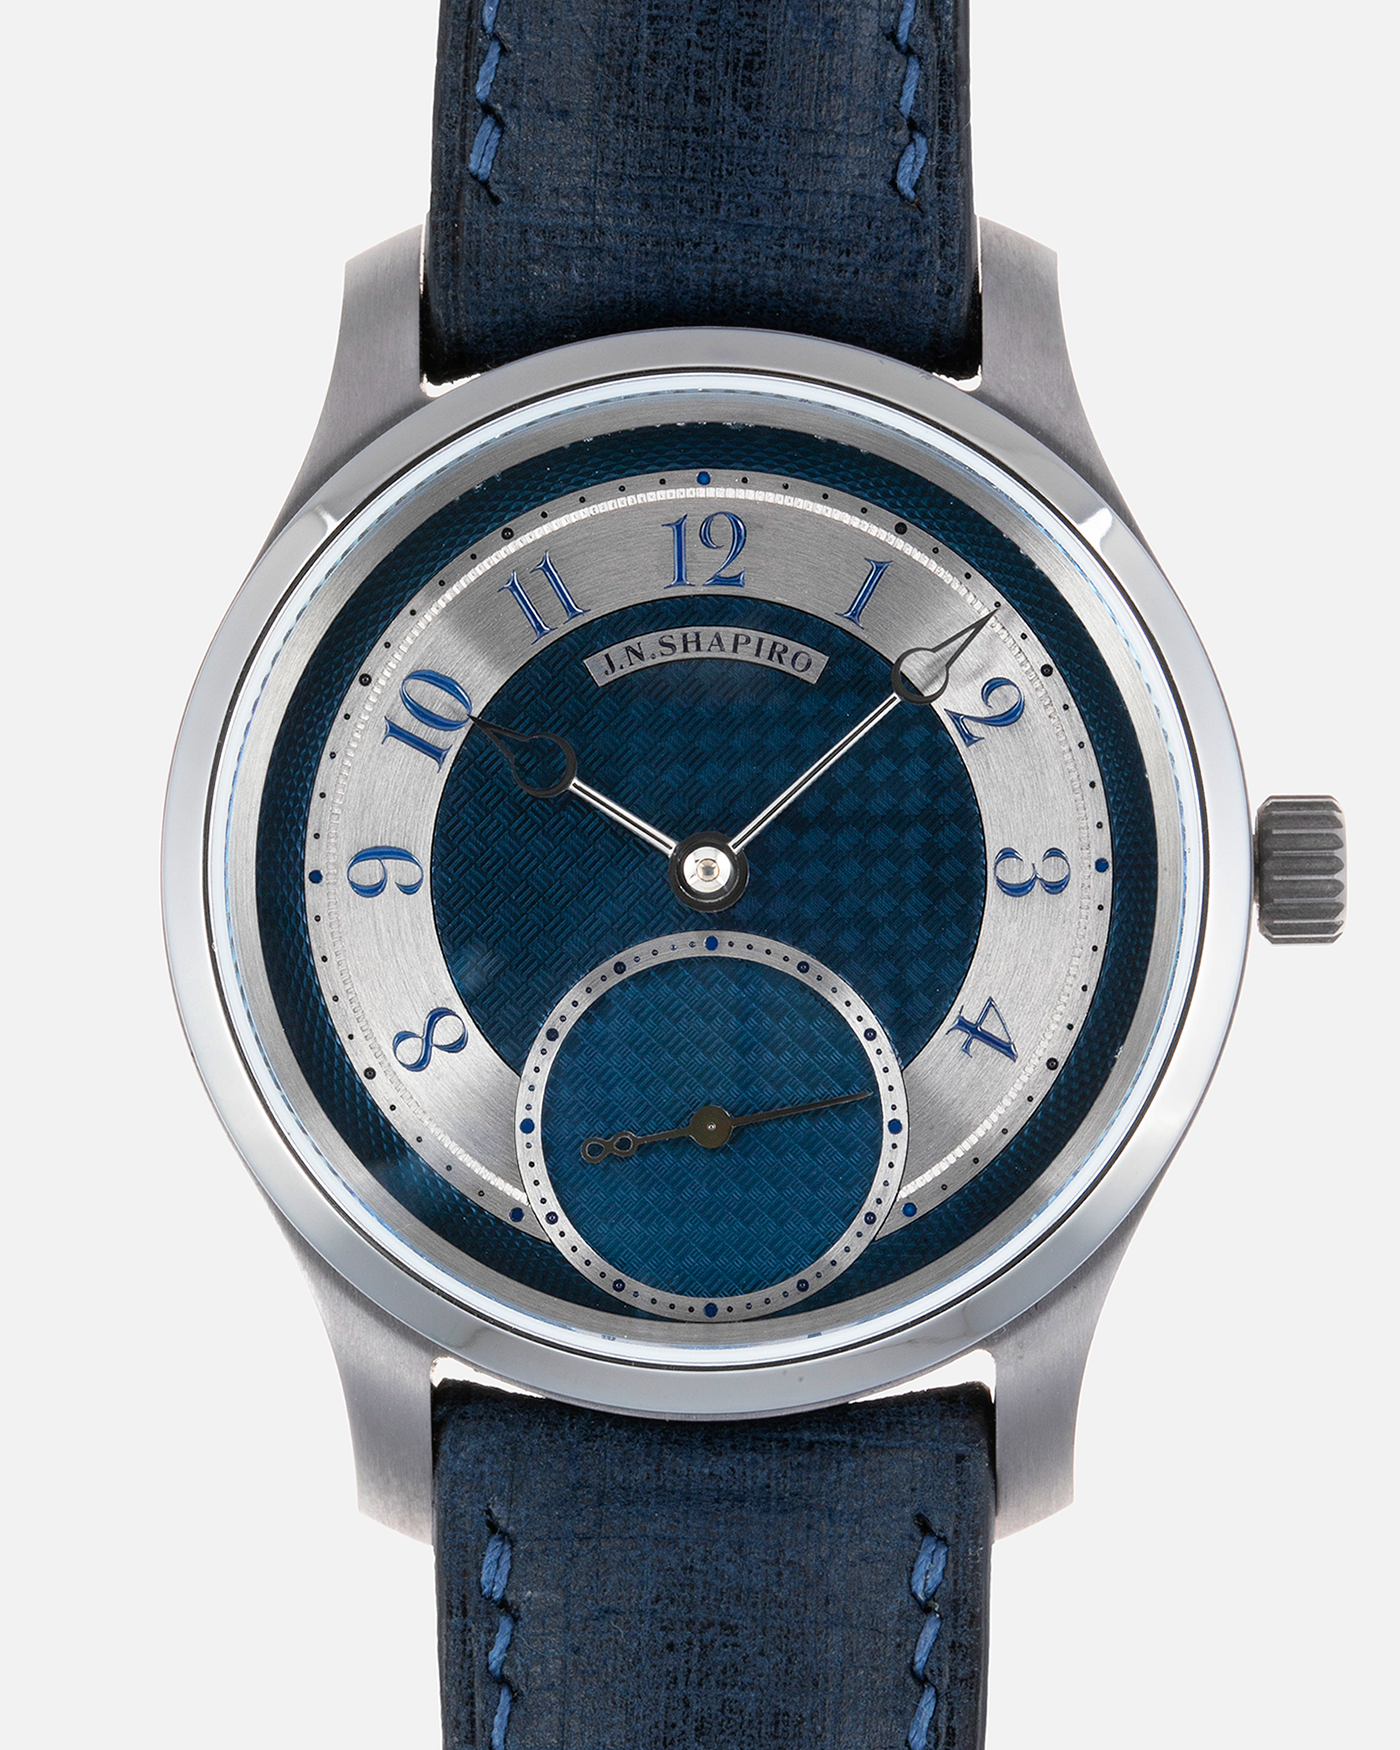 Brand: J.N. Shapiro Year: 2021 Model: Infinity Tantalum  Material: Tantalum Movement: UWD Cal. 33.1, Manual-Winding Case Diameter: 39mm Bracelet/Strap: J.N. Shapiro by Delugs Navy Blue Leather Strap with Signed Tantalum Tang Buckle with additional J.N. Shapiro Blue Alligator Strap and Grey Suede Strap